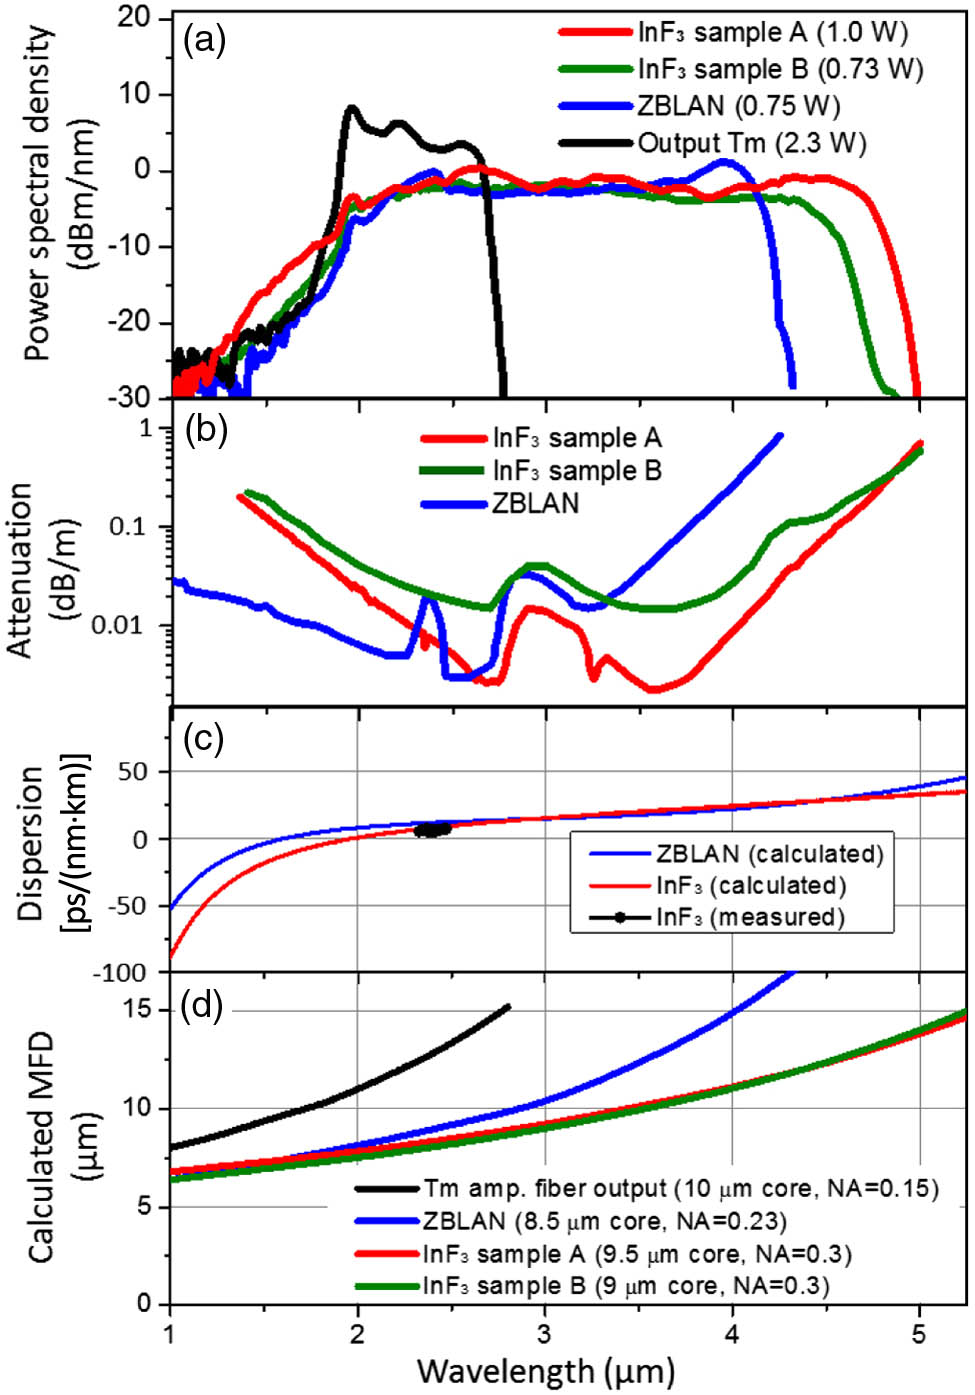 (a) Spectral distribution of the Tm amplifier (black line) injected into fluoride fibers. The SCs from the 20-m ZBLAN and 20-m InF3 fibers are shown with red, green, and blue lines, respectively. Corresponding SC output average powers are indicated in parentheses in the legend. (b) Measured attenuation and (c) calculated dispersion spectra of ZBLAN and InF3 fibers. (d) Calculated mode field diameter (MFD) of fundamental modes in ZBLAN, InF3, and silica fibers as a function of wavelength.